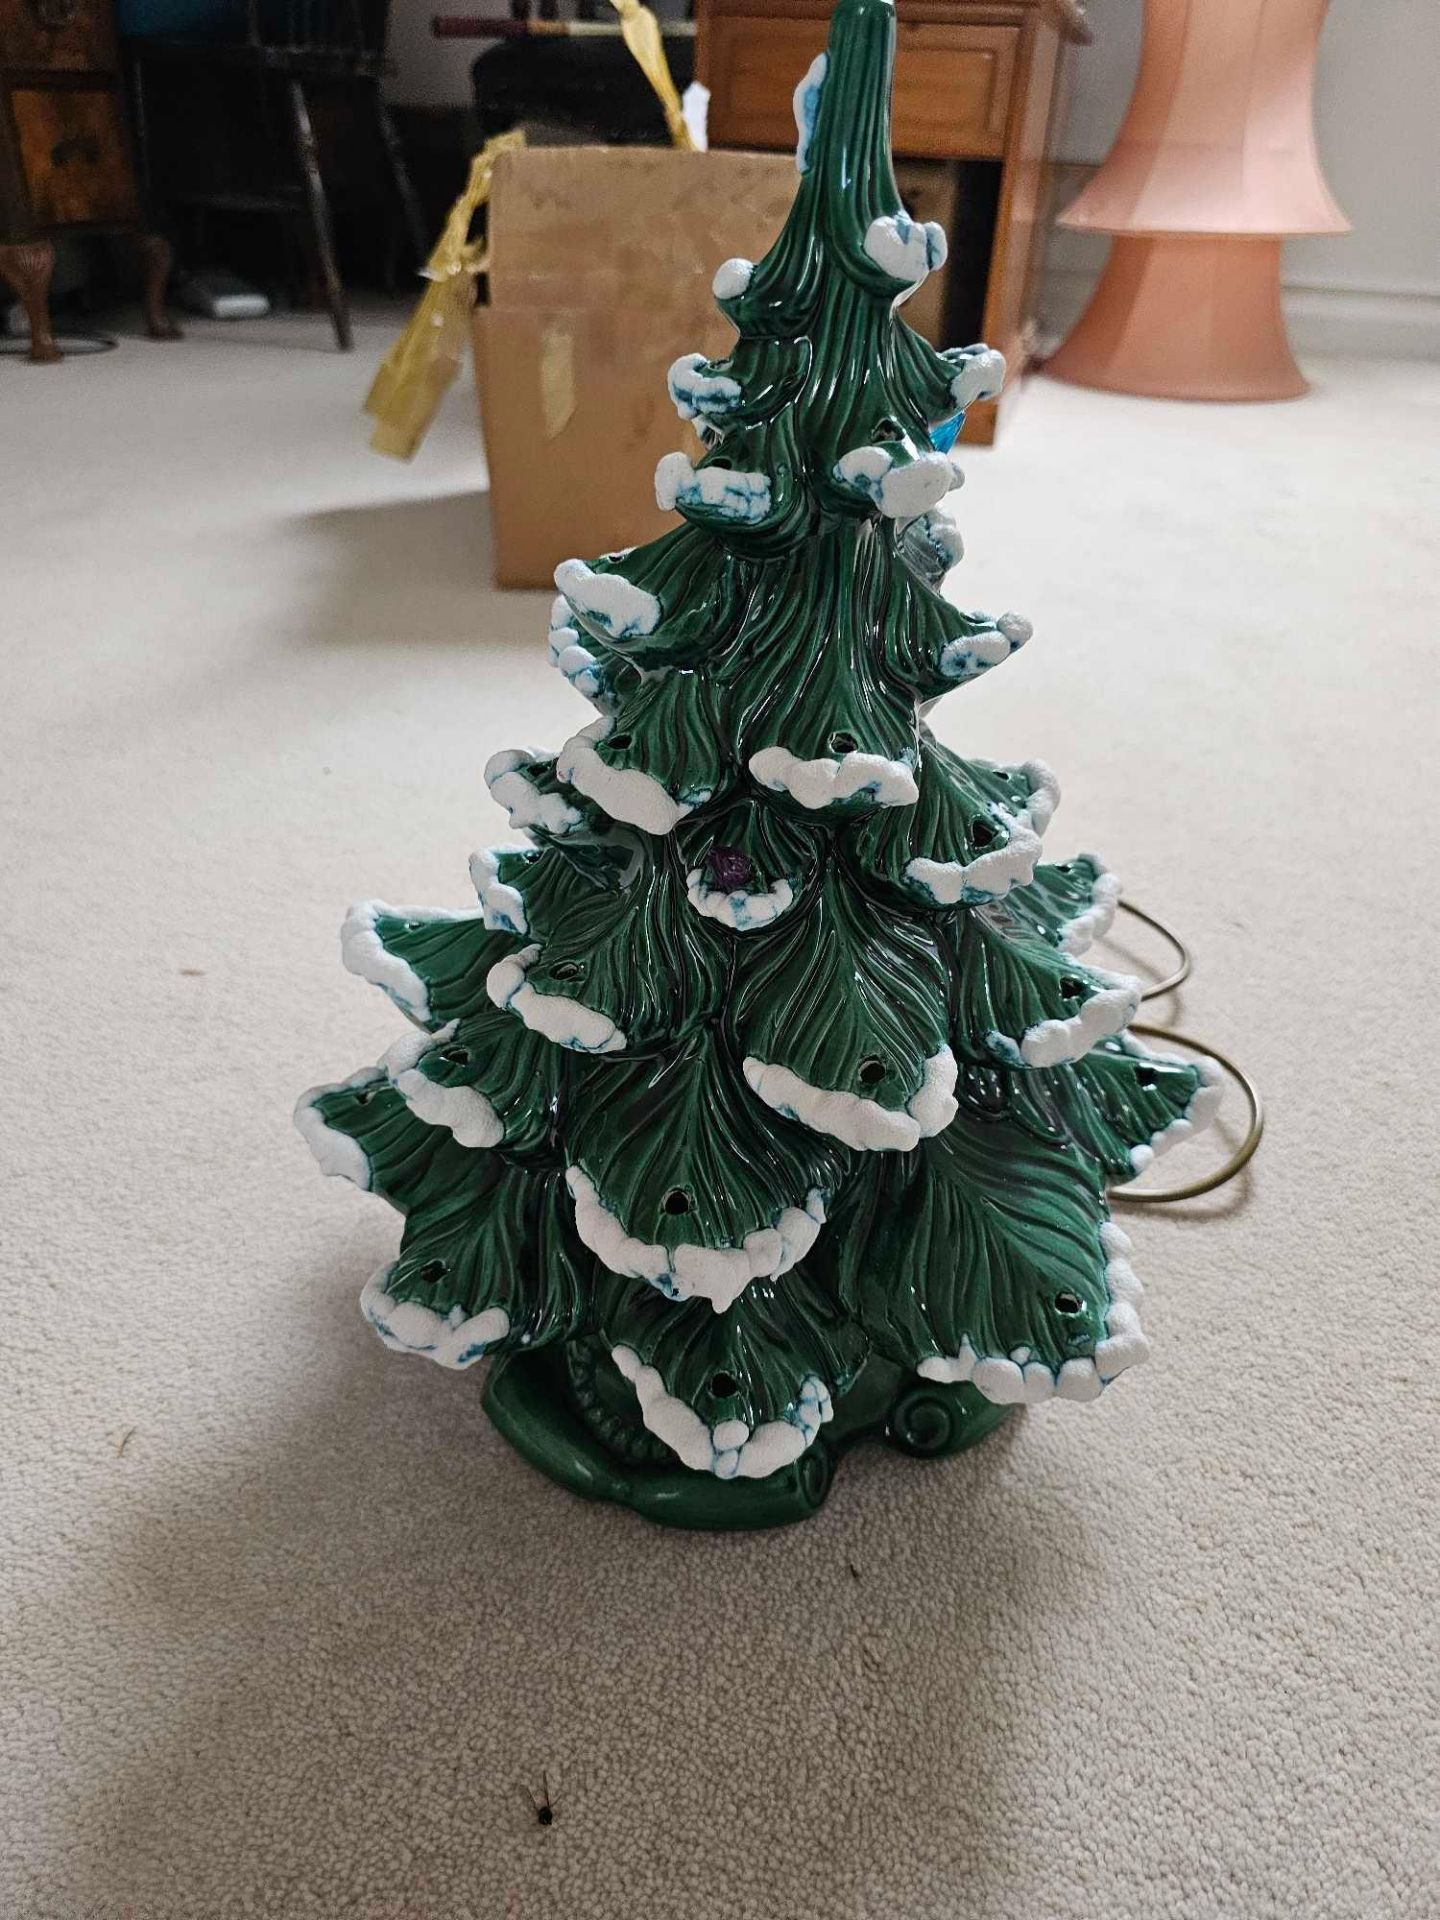 A Vintage 2 Piece Atlantic Mold Ceramic Christmas Tree With Lights White Frost Tip Snow - Image 2 of 2